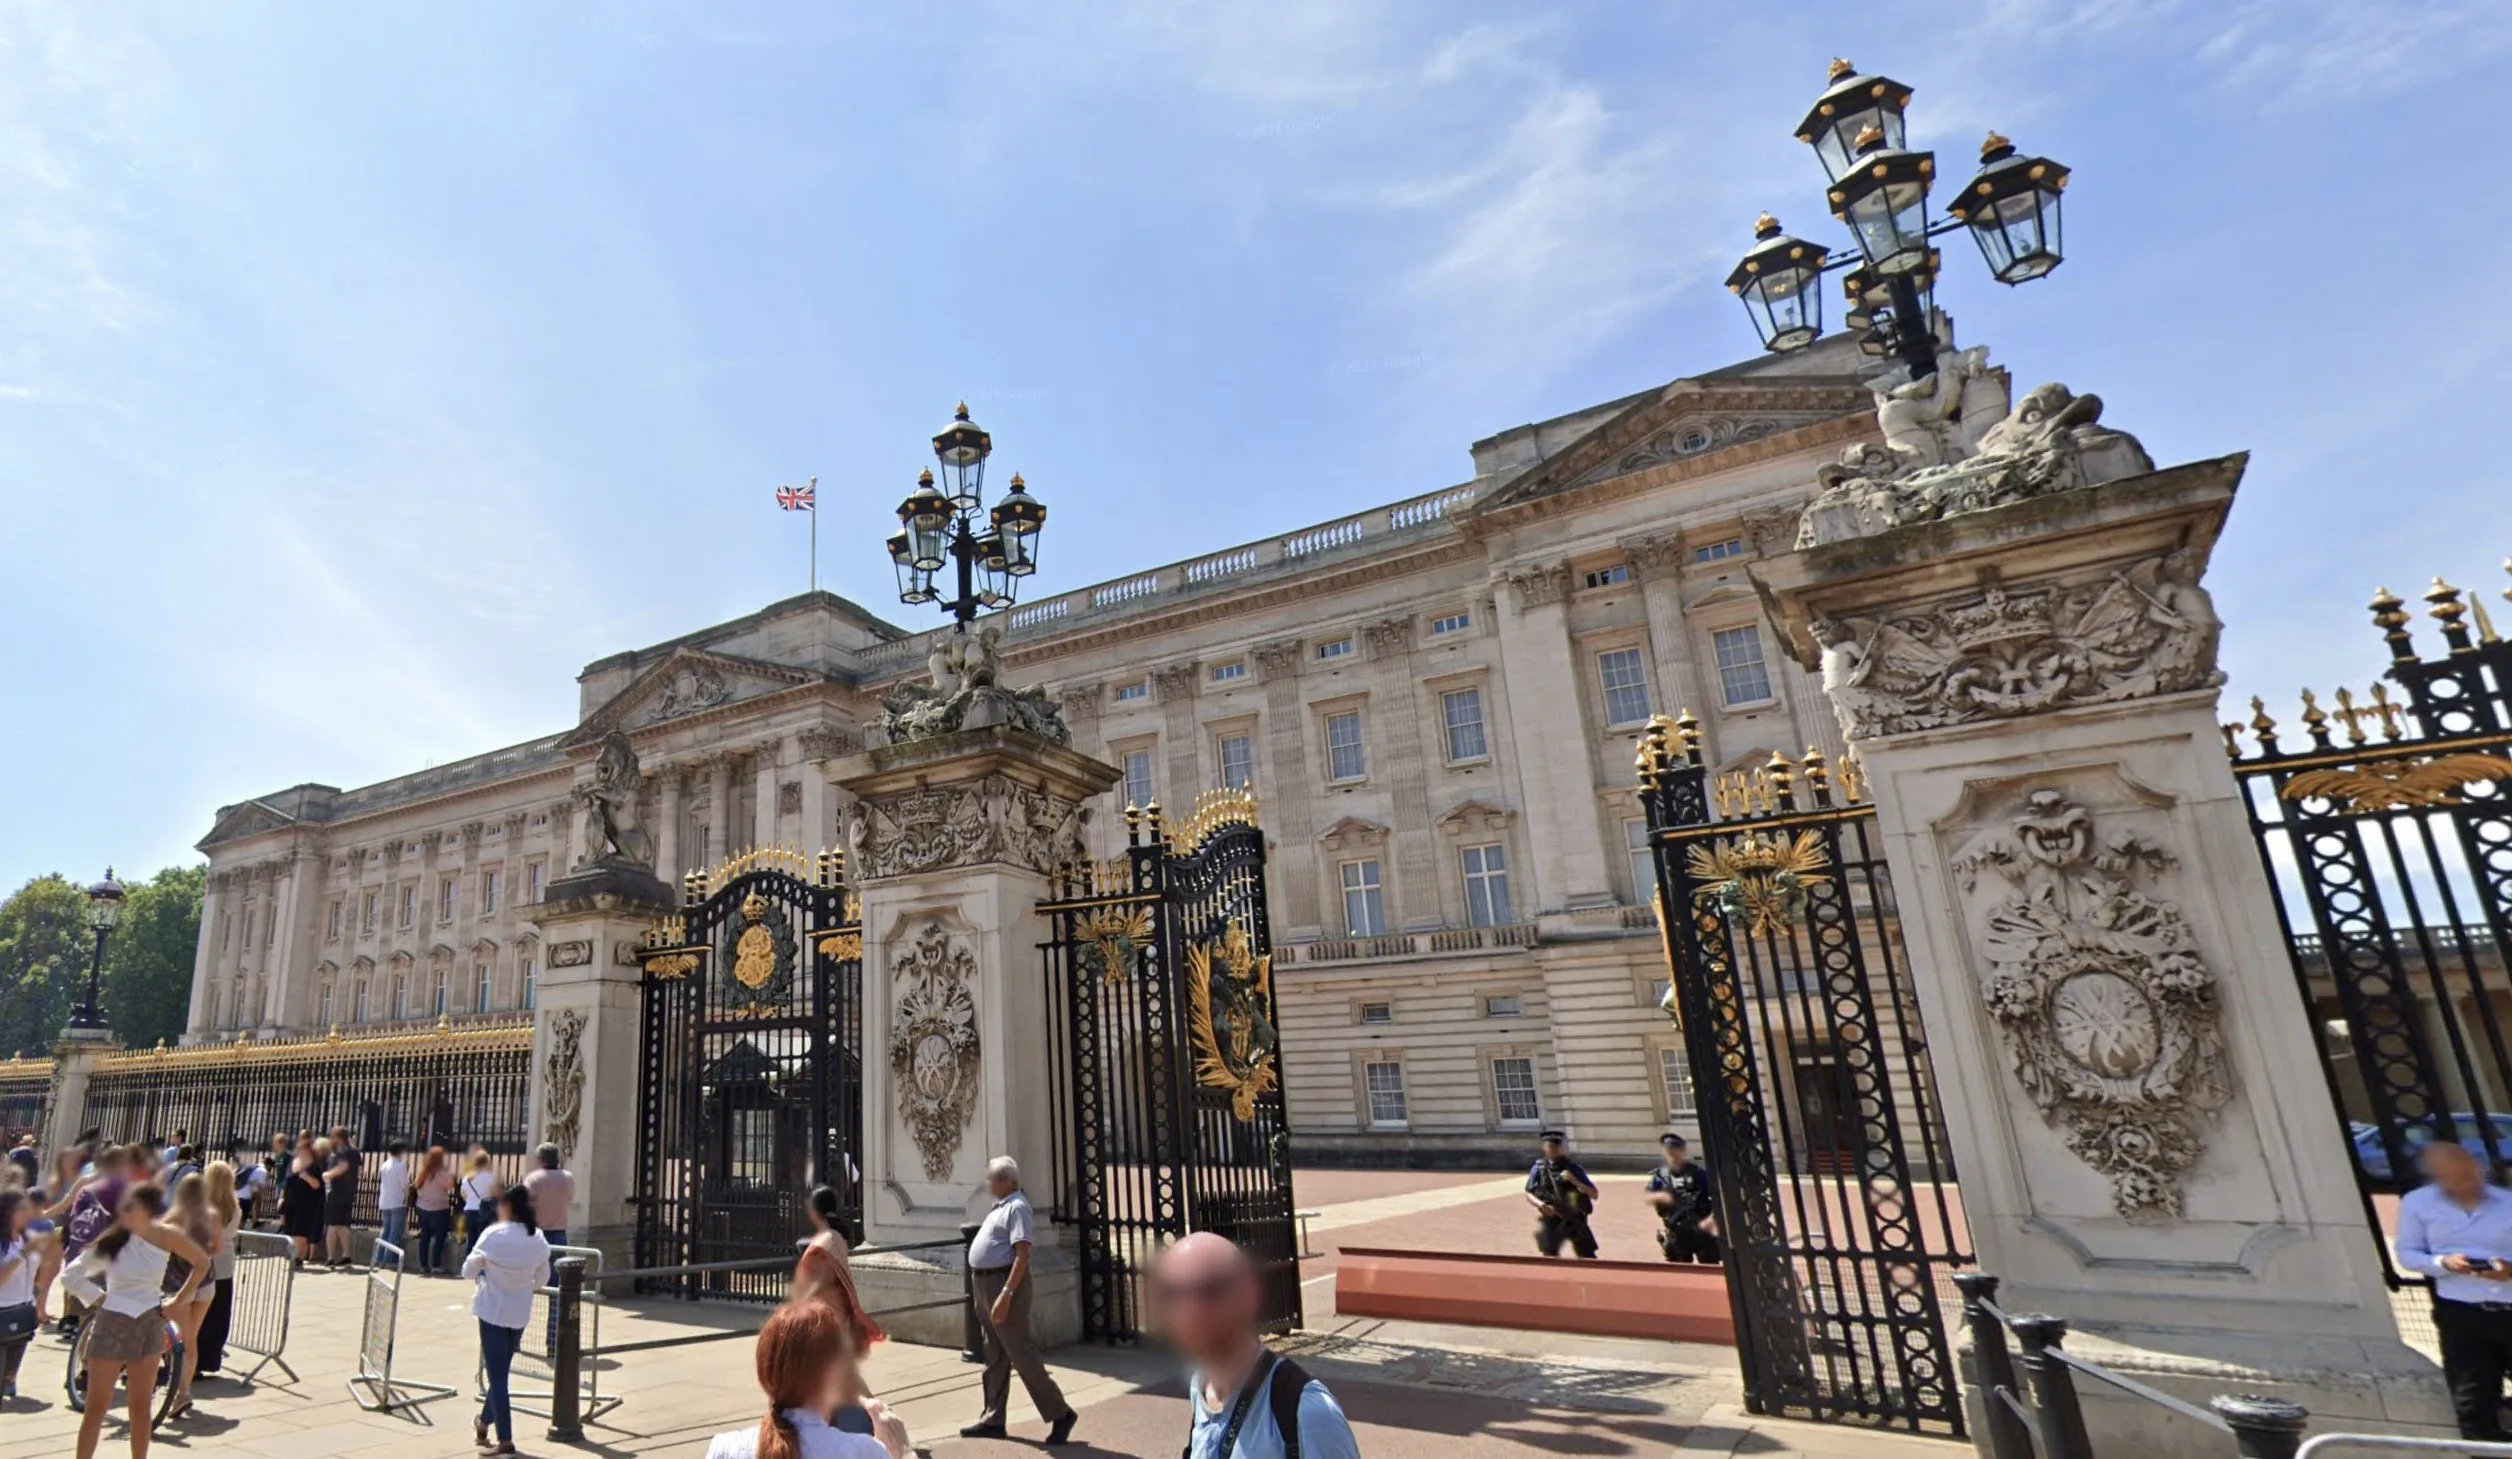 Join the Royal Family's communications team amid a storm of controversy surrounding Kate Middleton. Navigate crises, shape narratives, and engage global audiences.